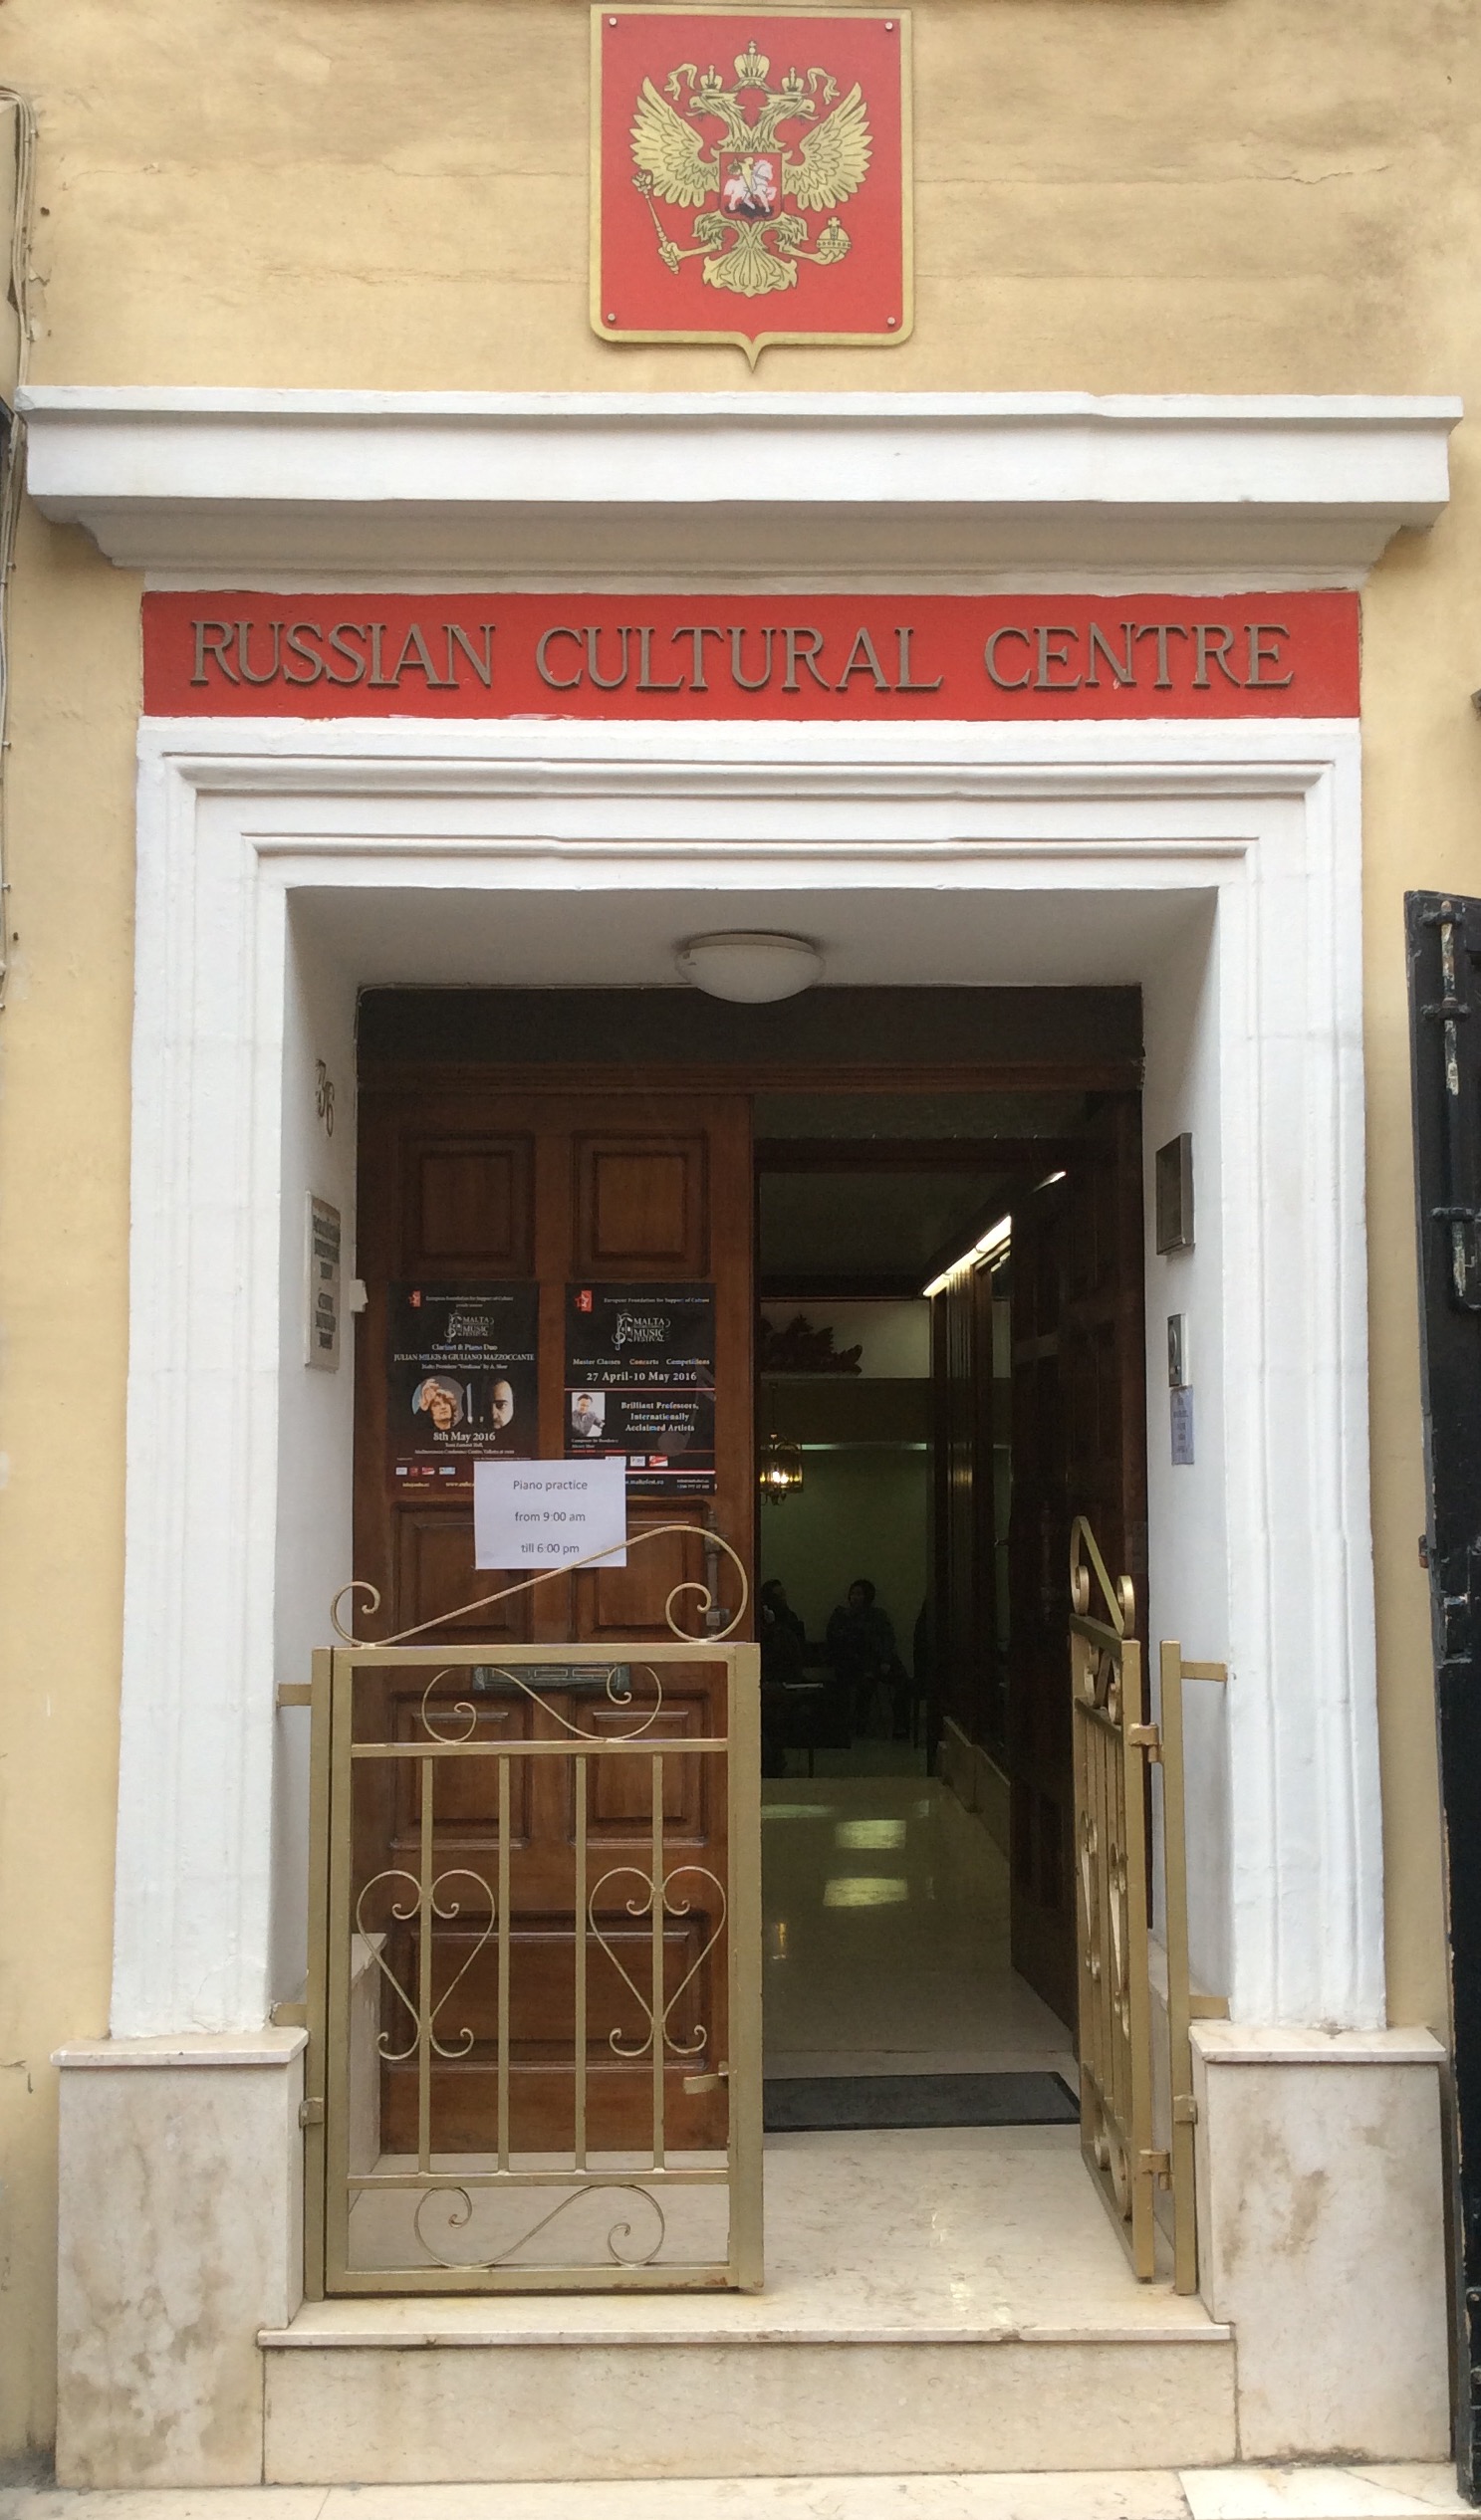 Visits The Russian Cultural Centre